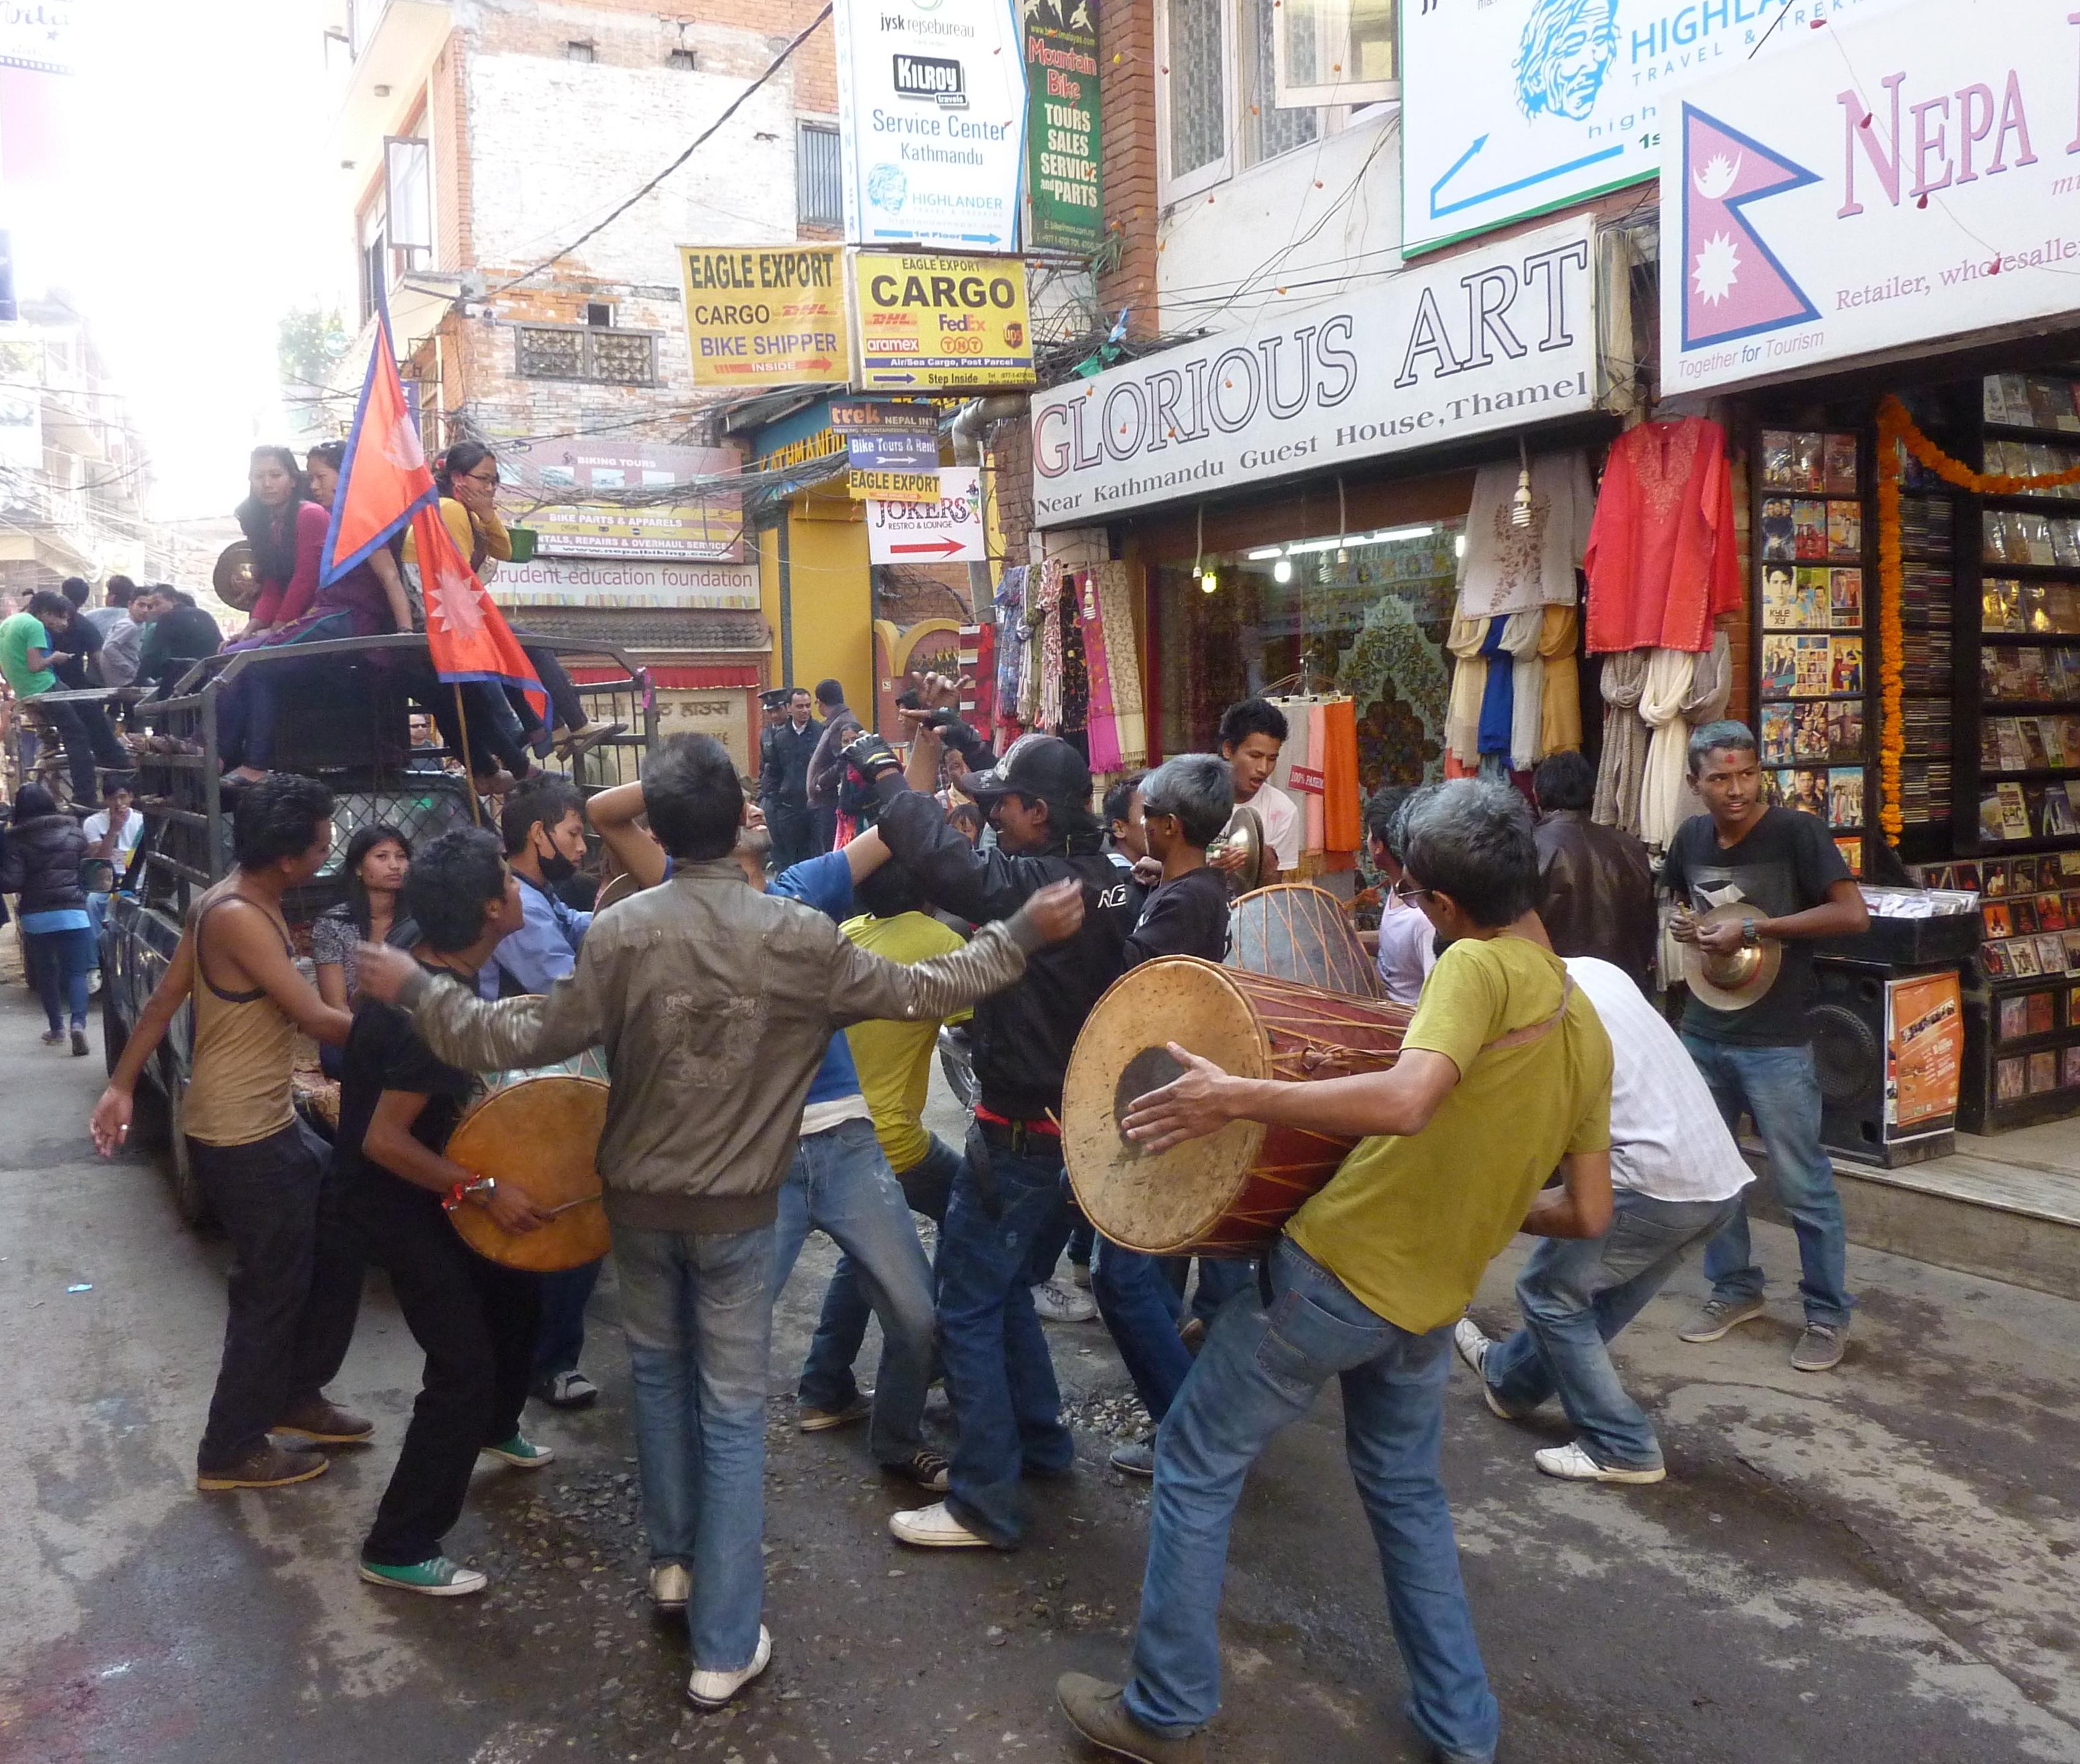 These guys were part of a fairly righteous jam  and dance off in the street during one day of Tihar.